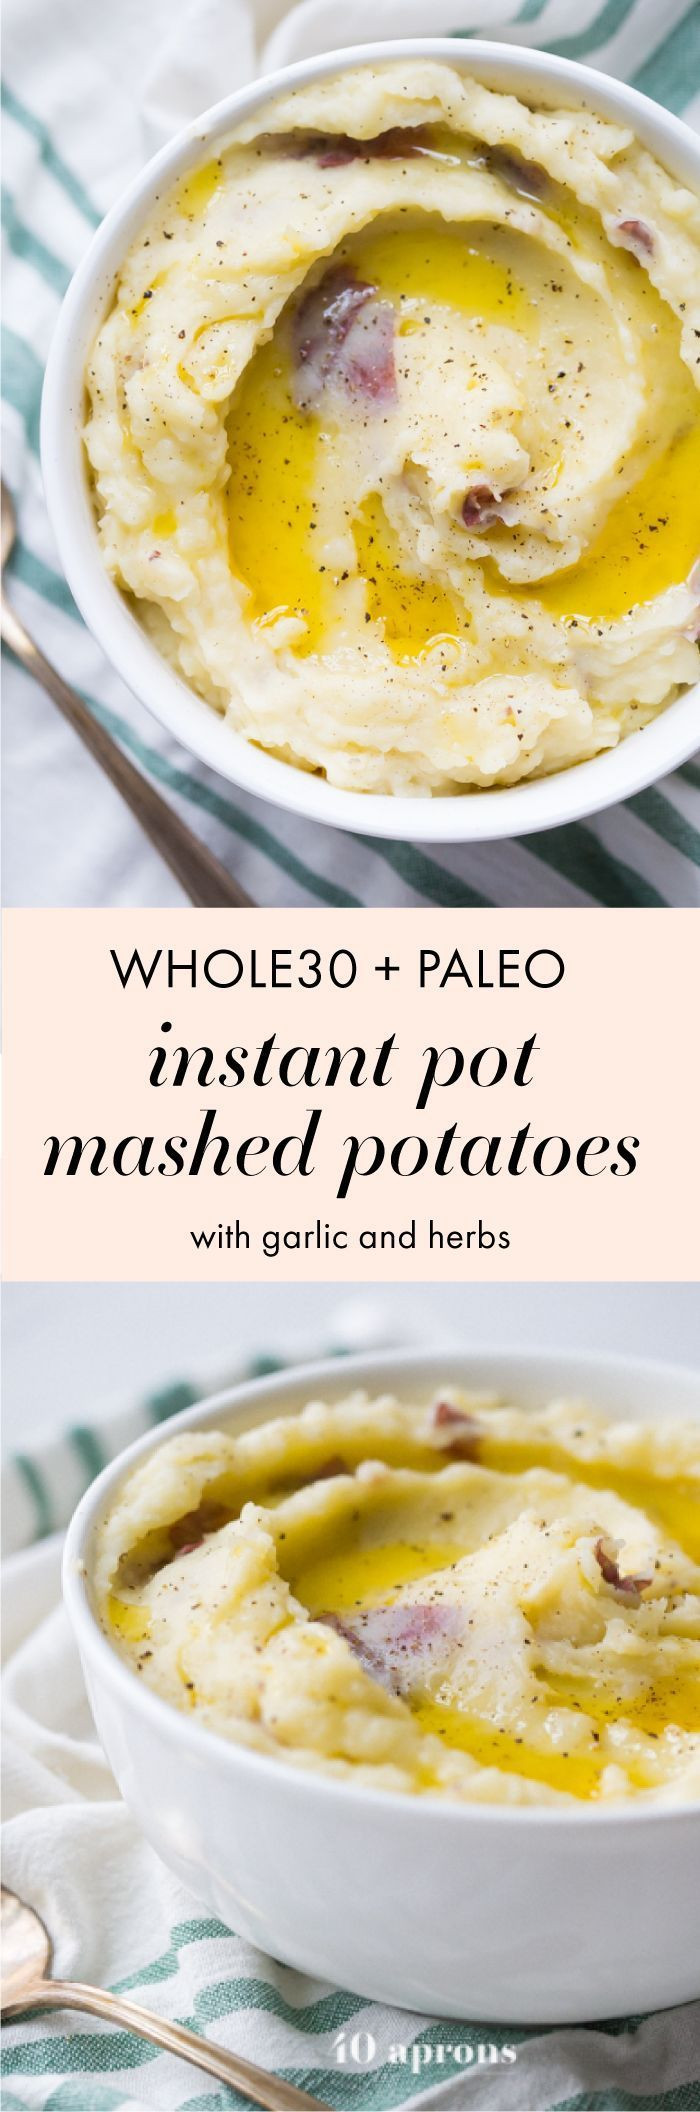 Are Instant Mashed Potatoes Healthy
 best The Best Paleo Recipes images on Pinterest